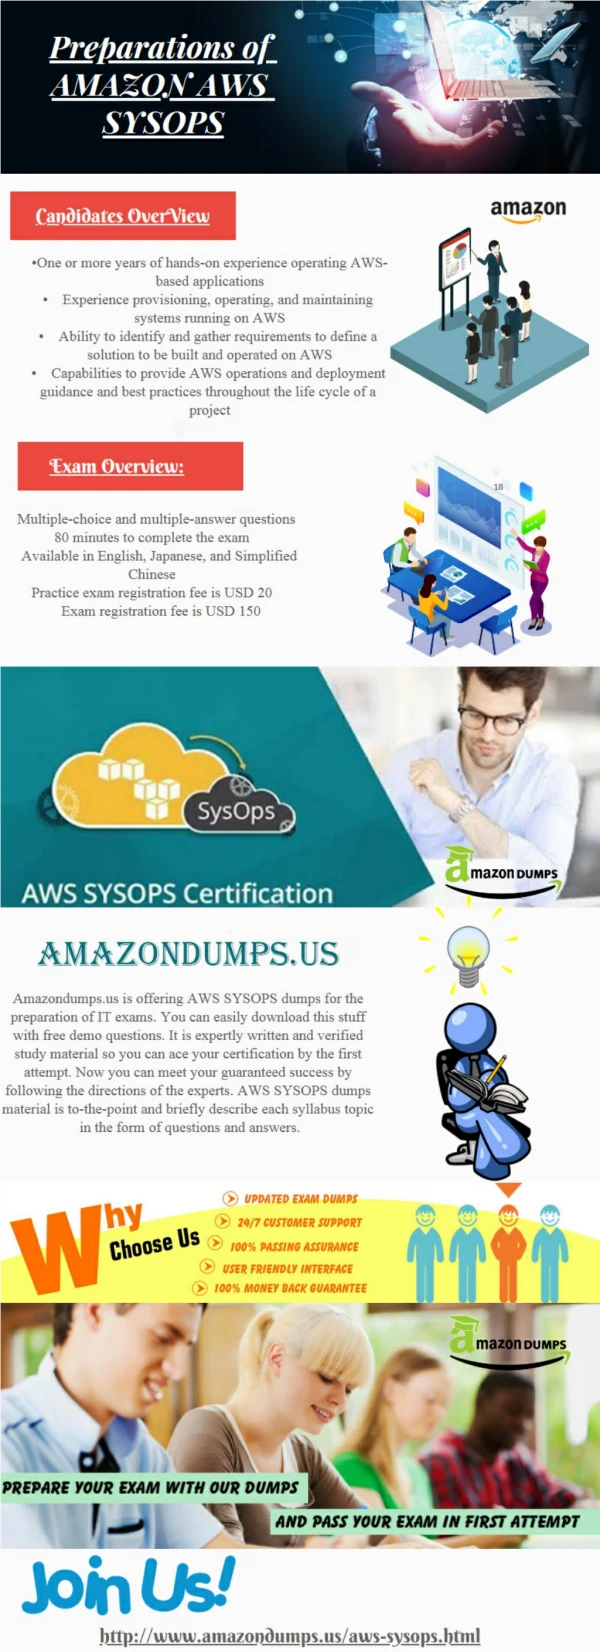 Pass AMAZON AWS SYSOPS Exam in First Attempt With Amazondumps.us - AWS SYSOPS Exam Dumps